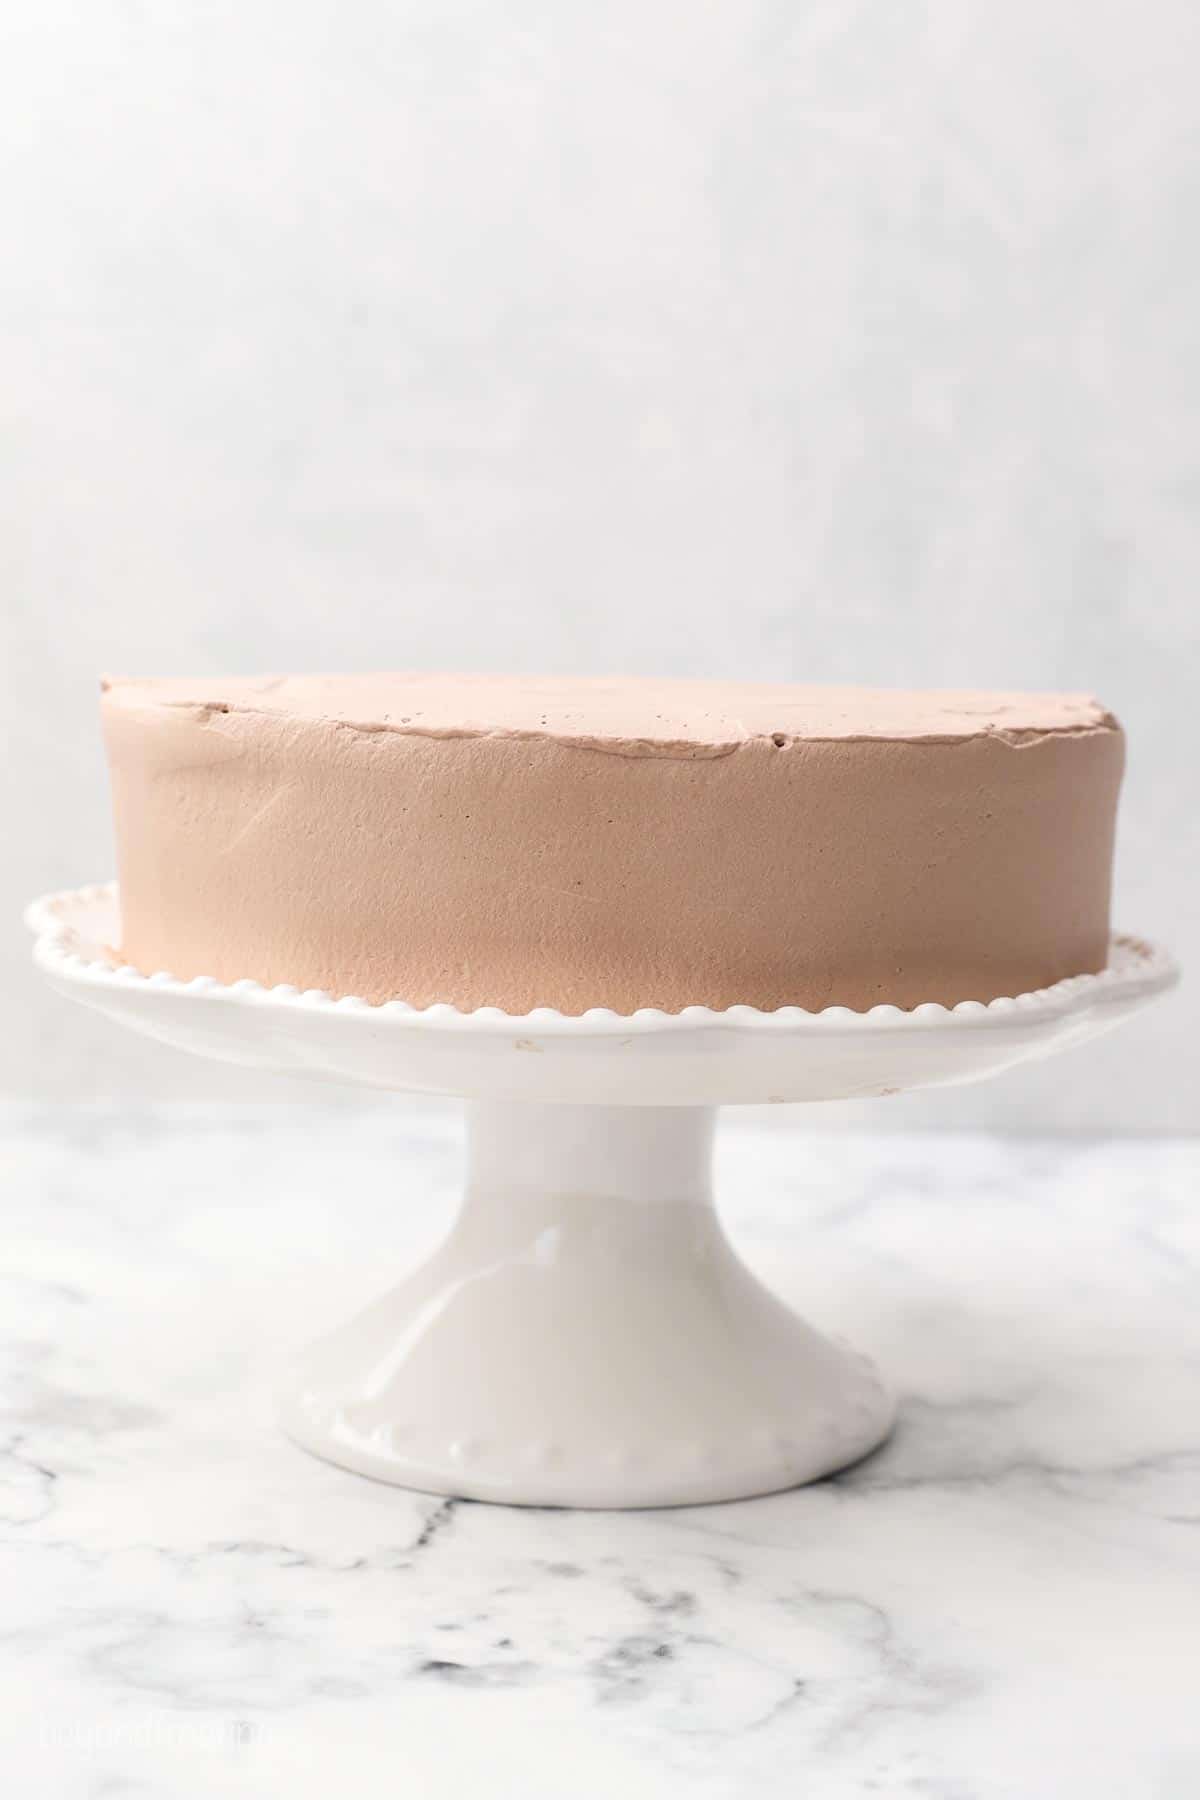 a white cake stand with a small layer cake frosted with chocolate whipped cream